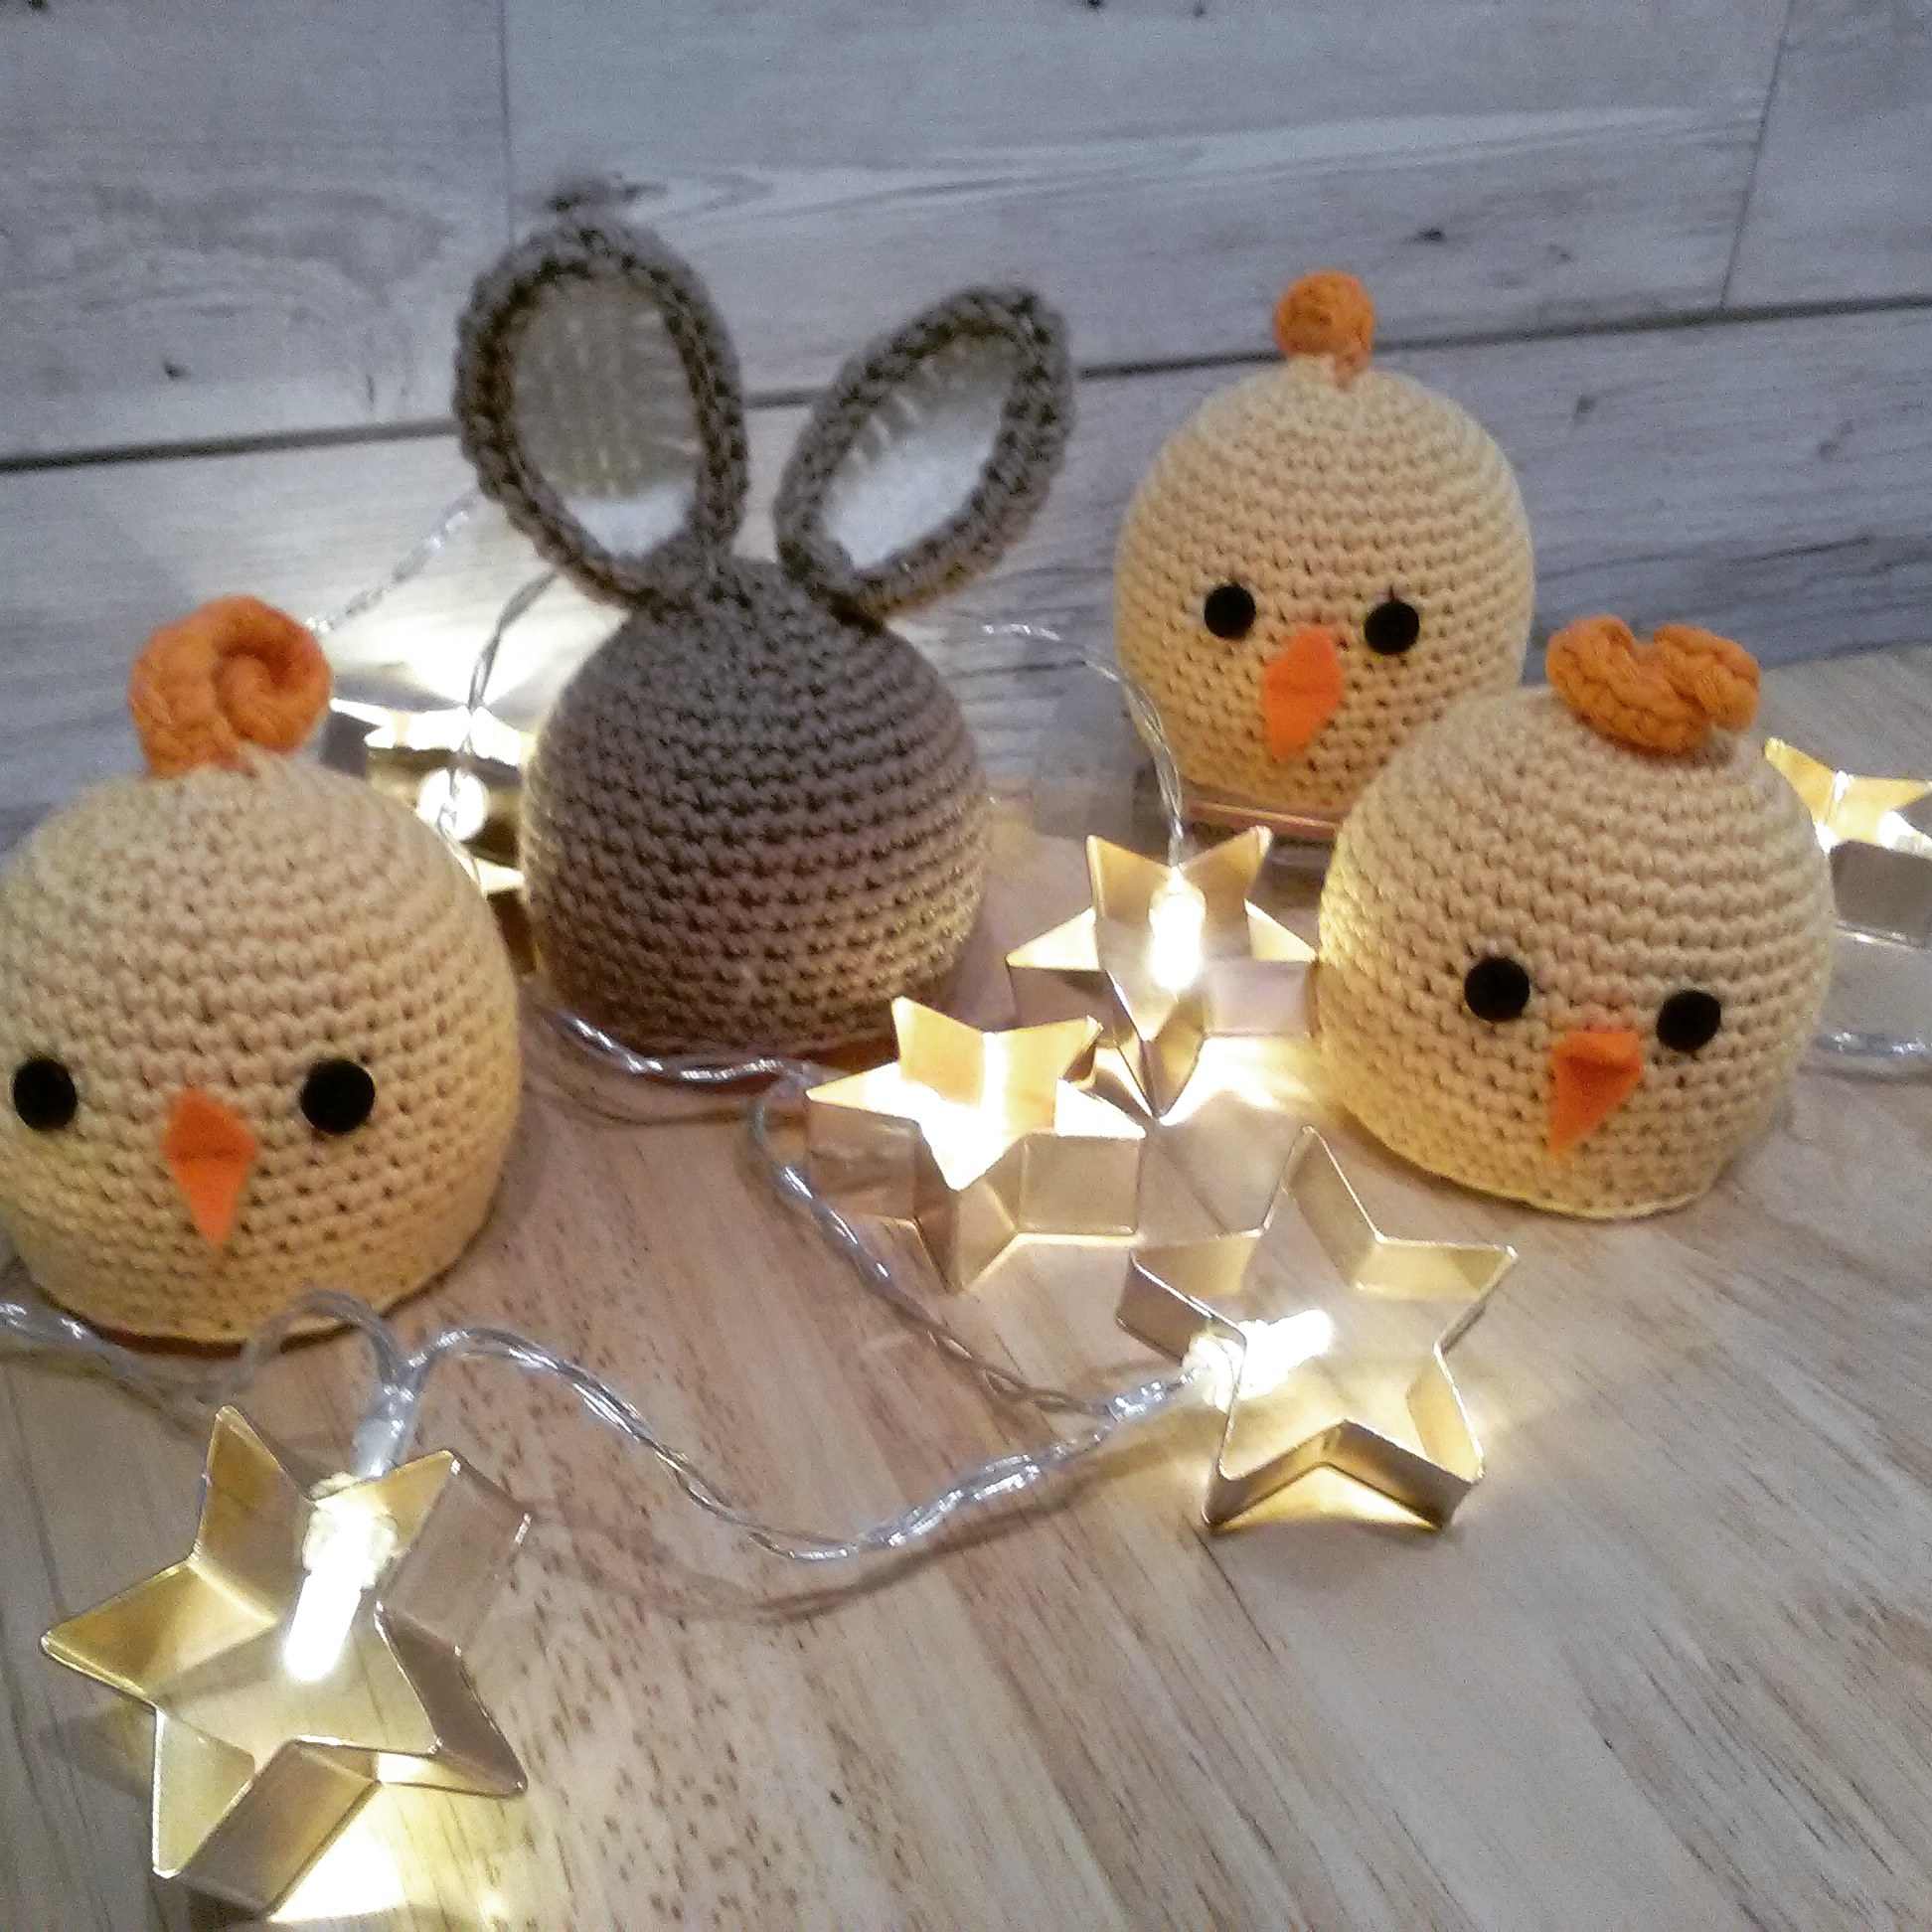 Chick & Bunny chocolate orange covers crochet project by Wendy P